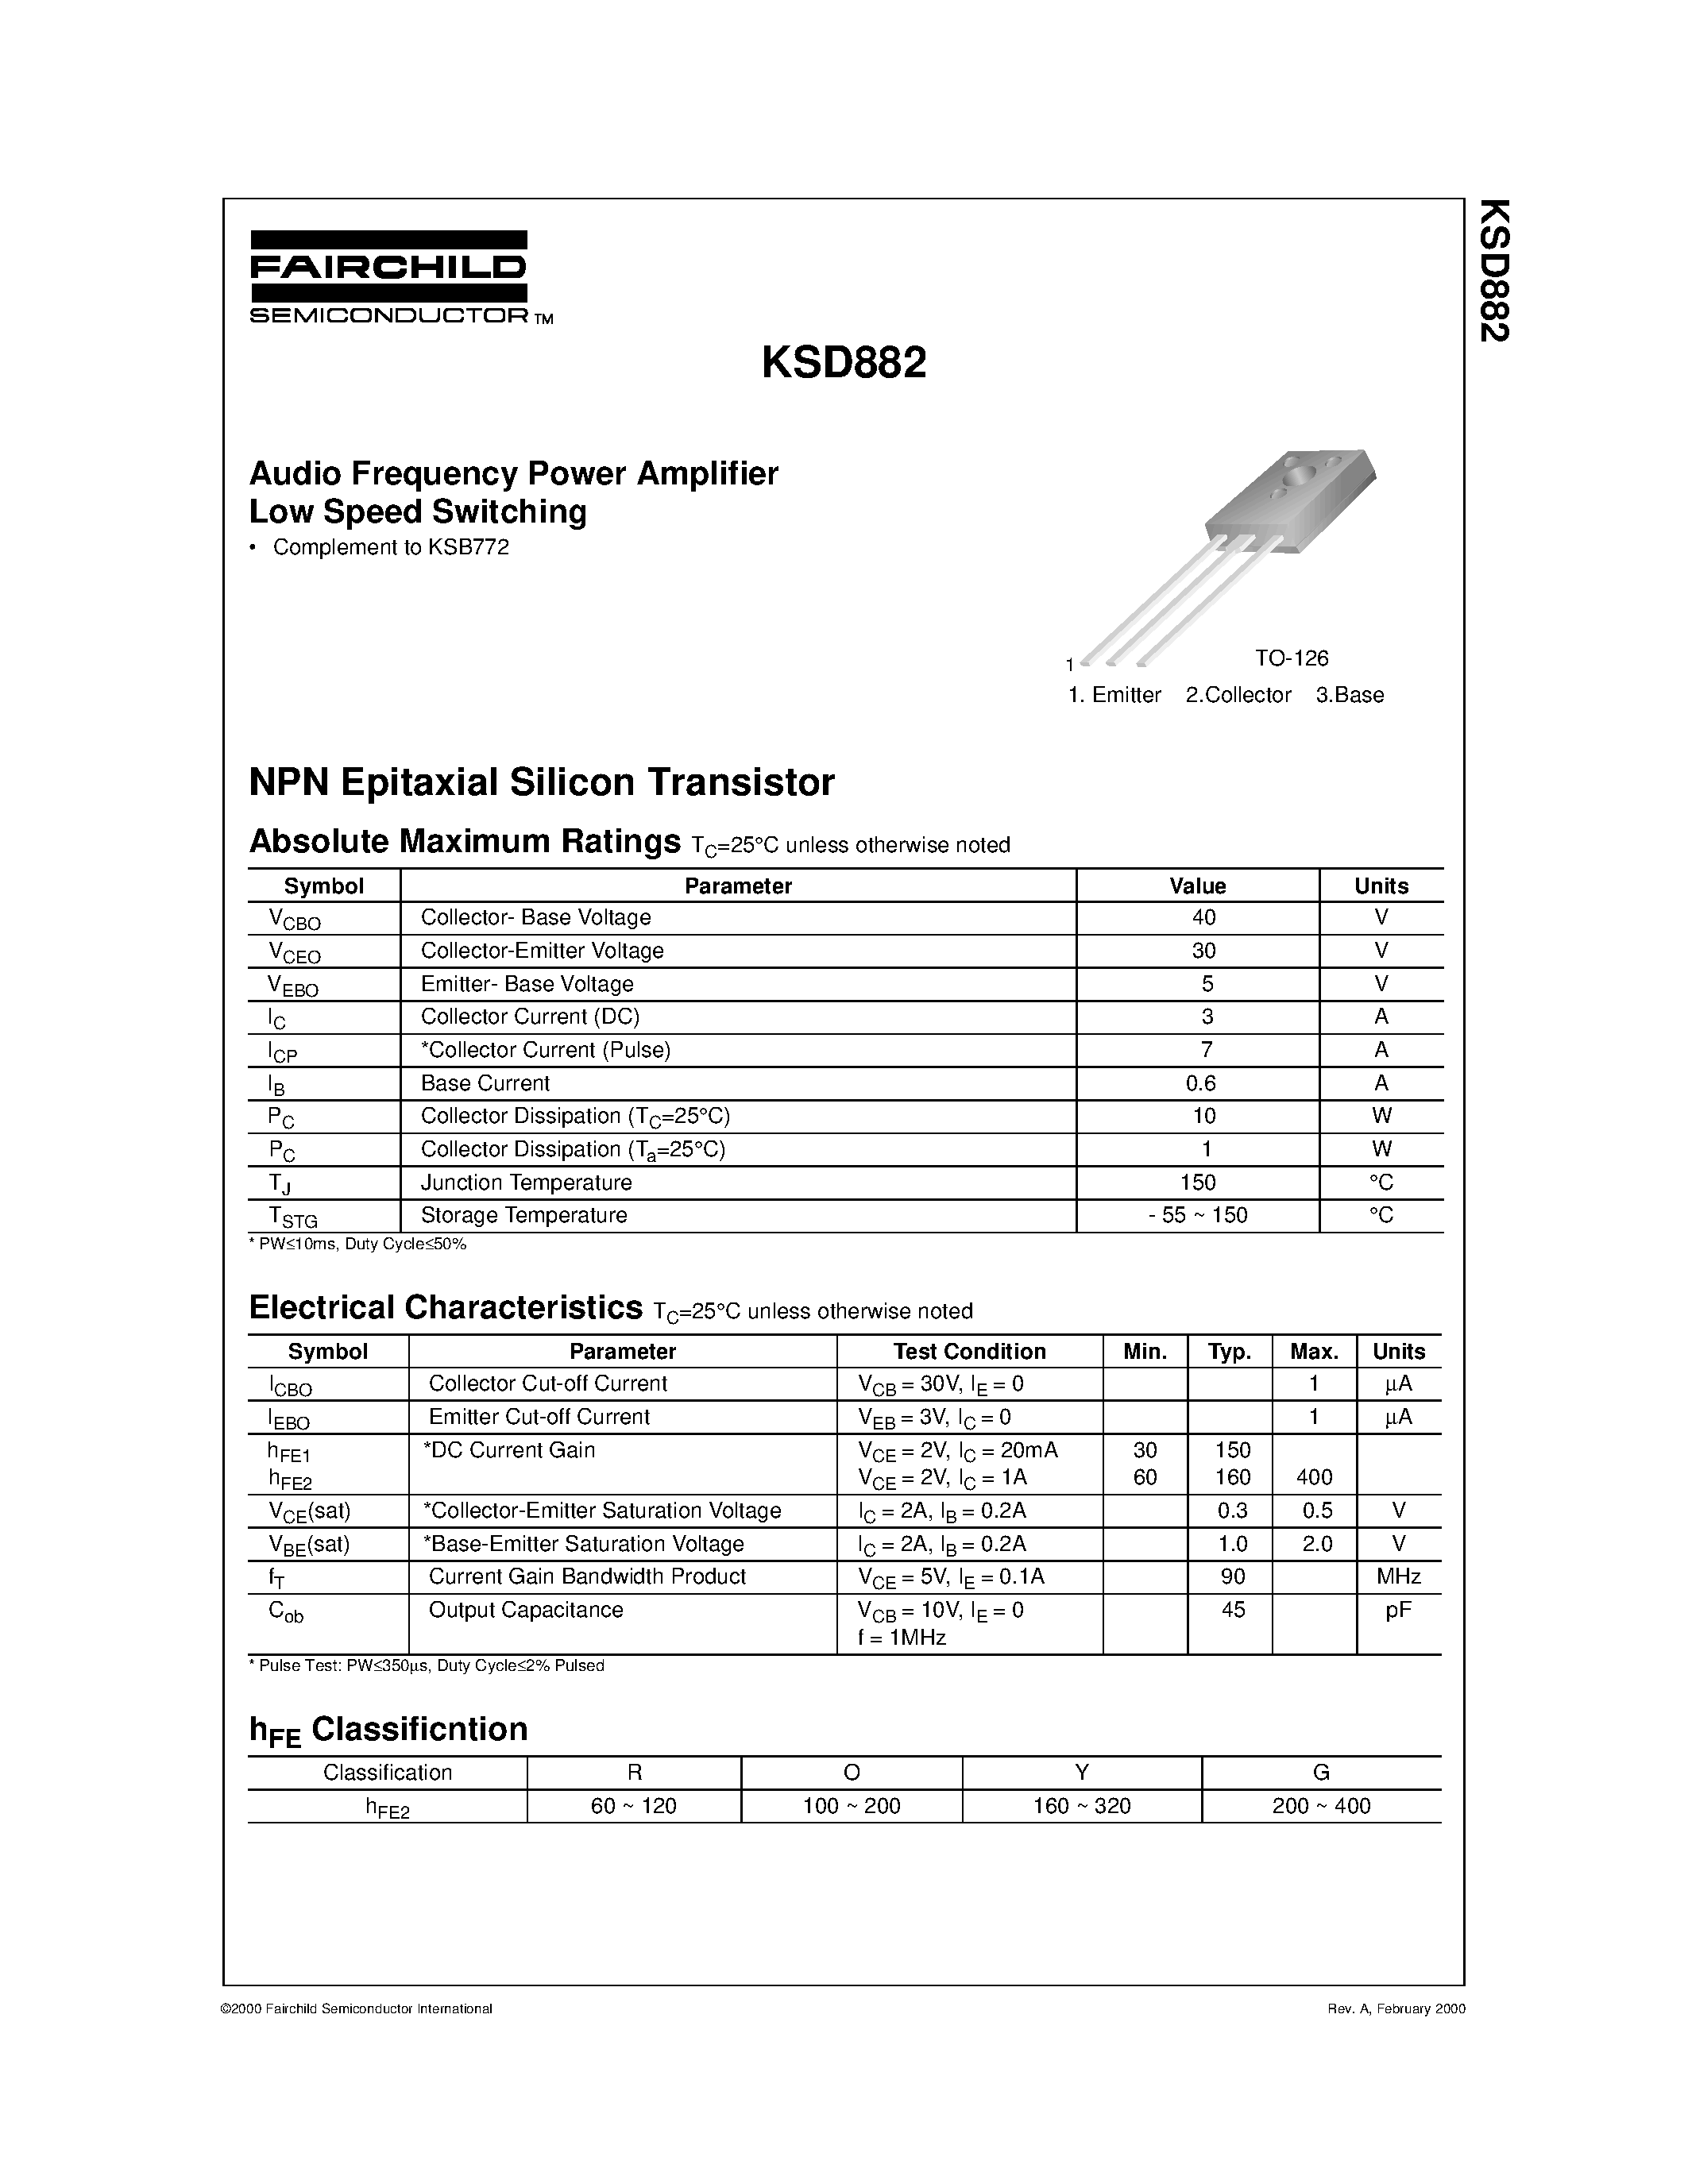 Datasheet KSD882 - Audio Frequency Power Amplifier page 1